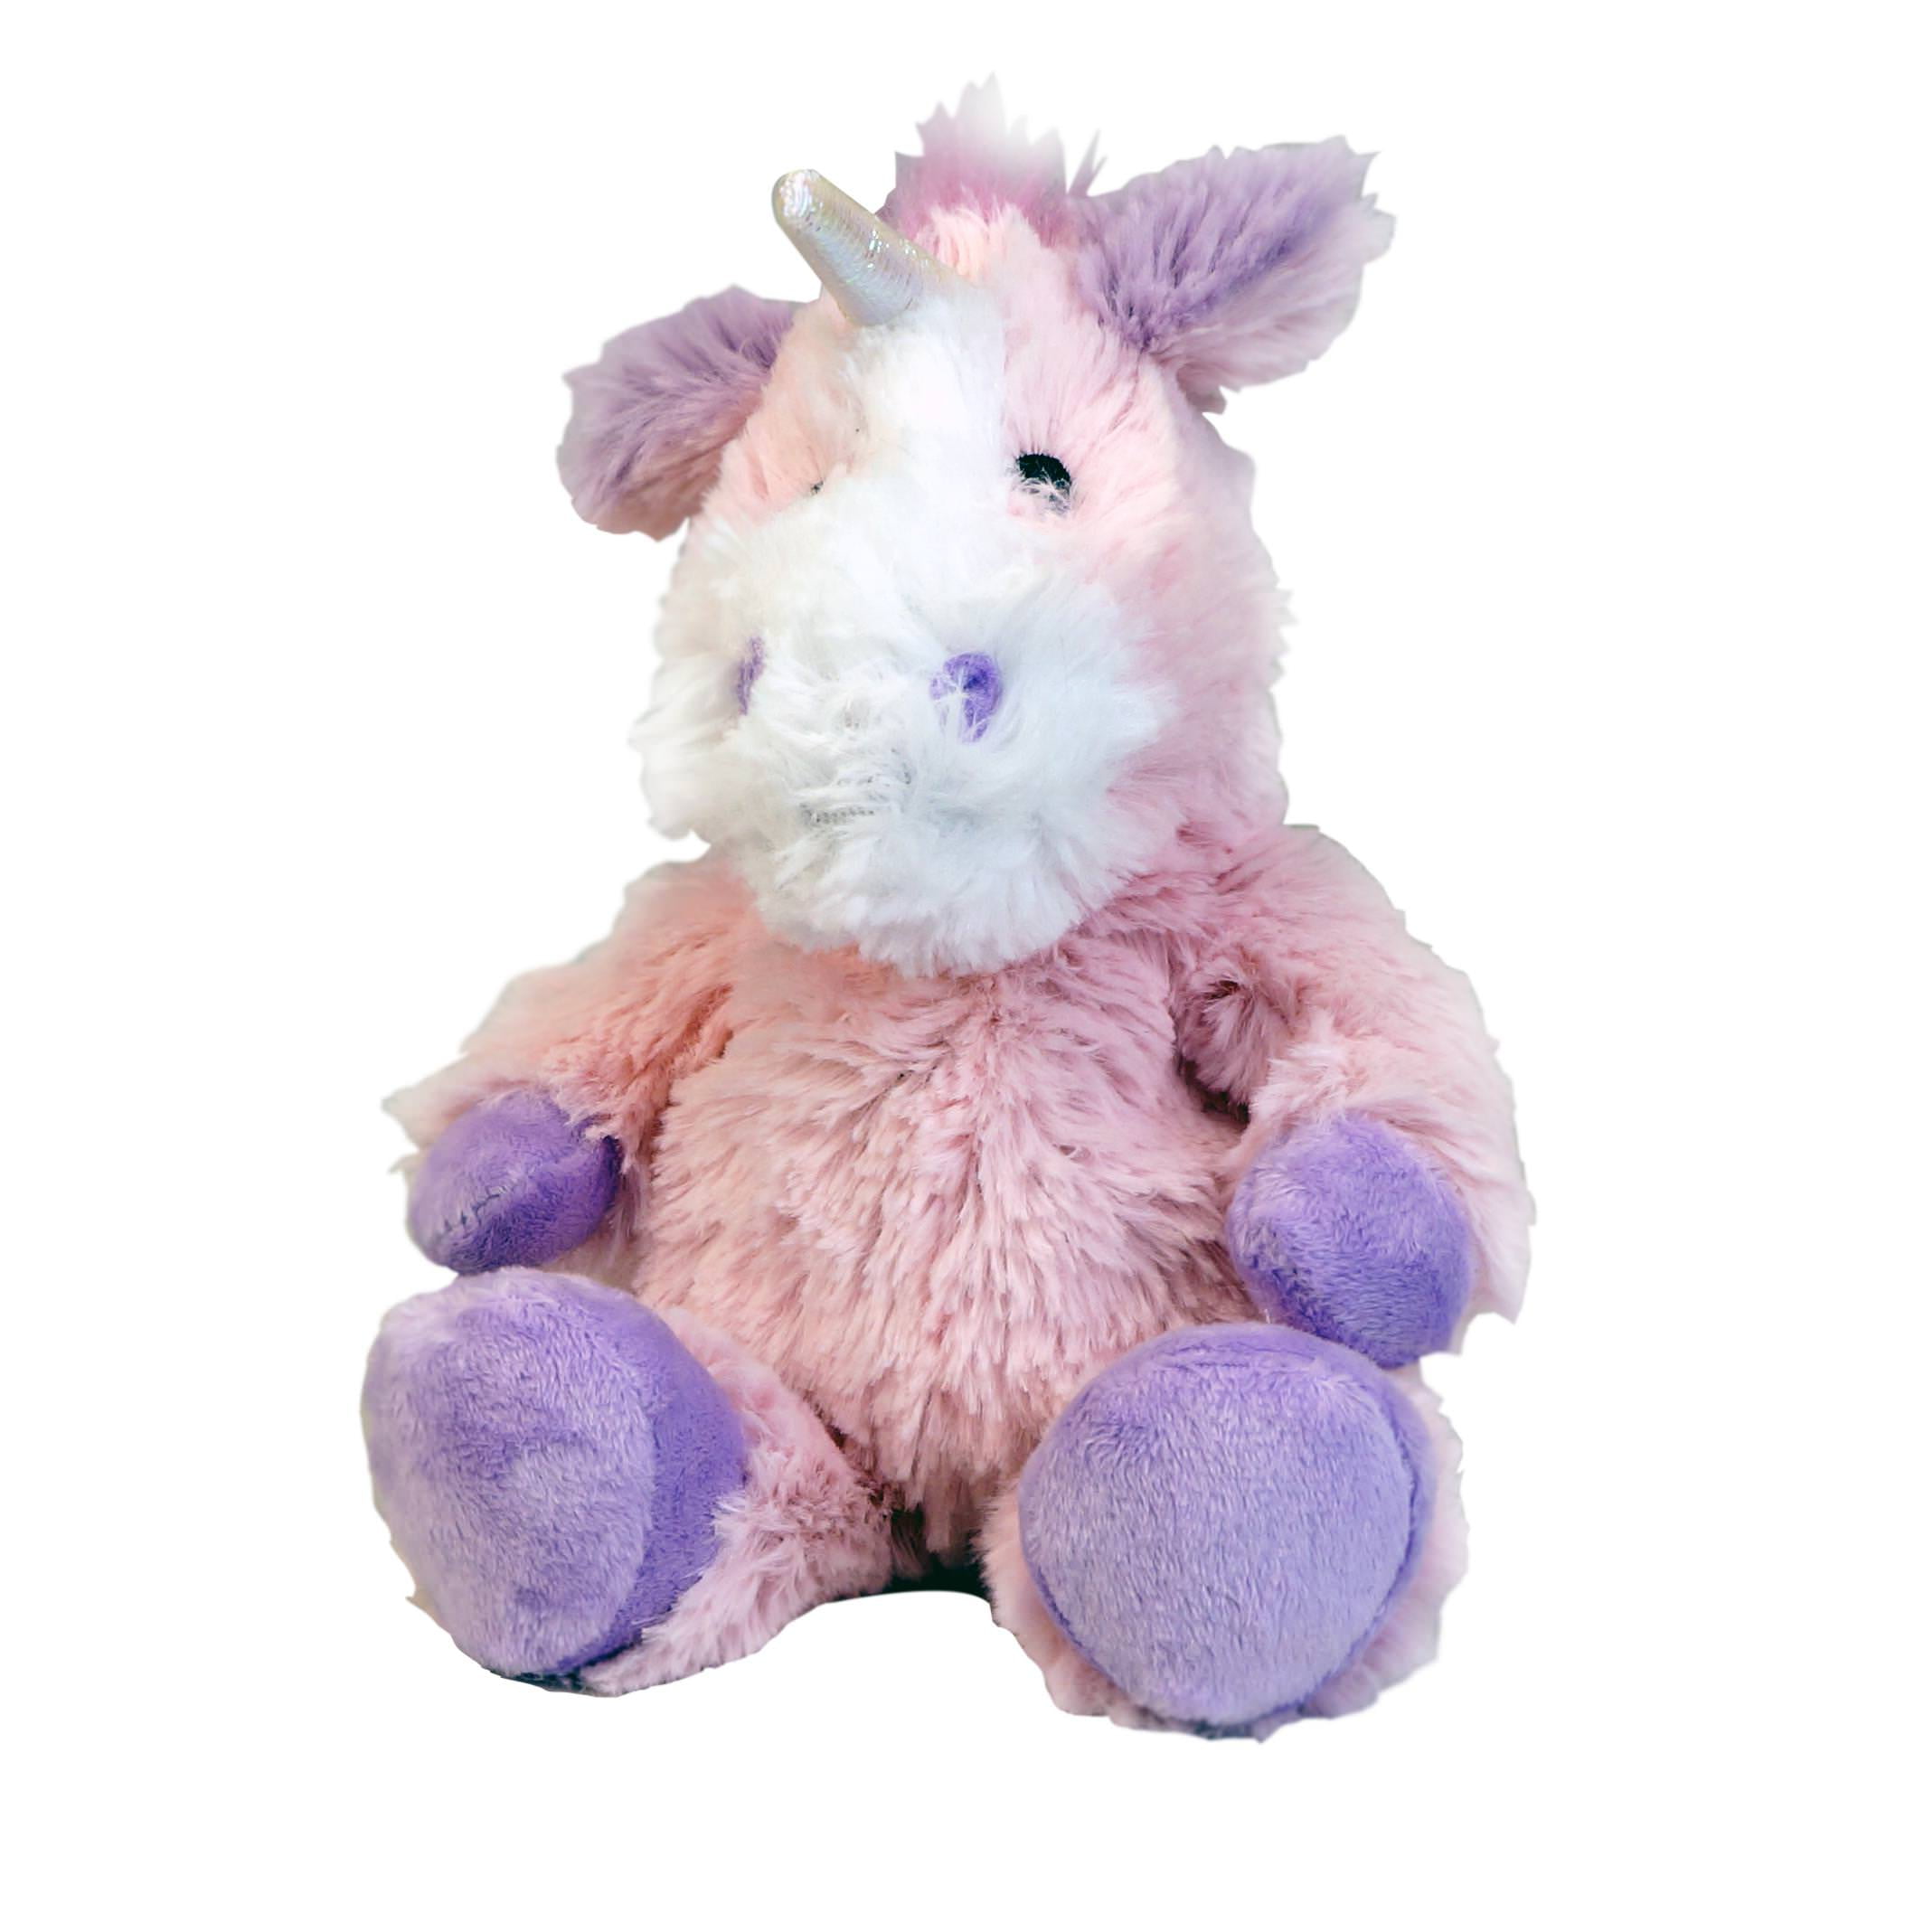 Warmies Microwavable French Lavender Scented Plush Llama Warmies 